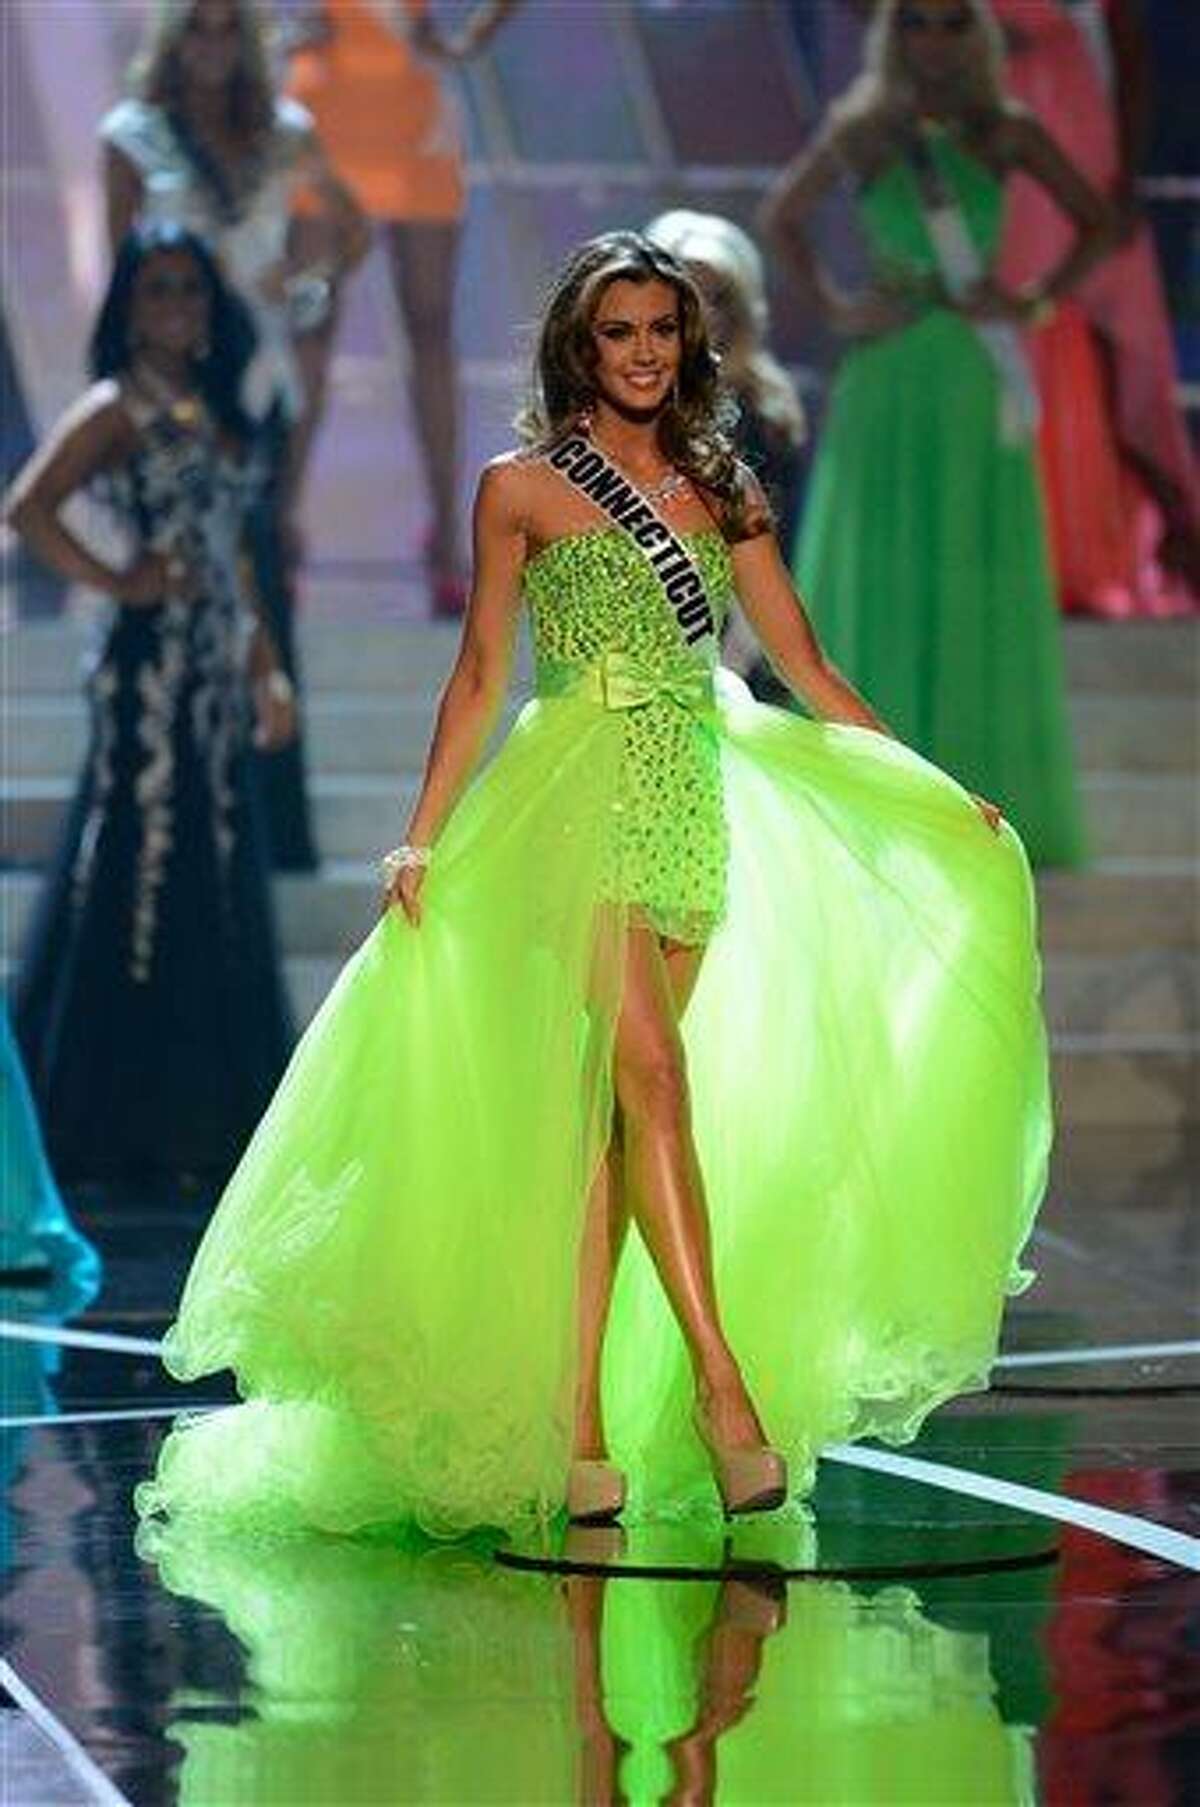 Connecticut woman crowned Miss USA in Las Vegas (photos)